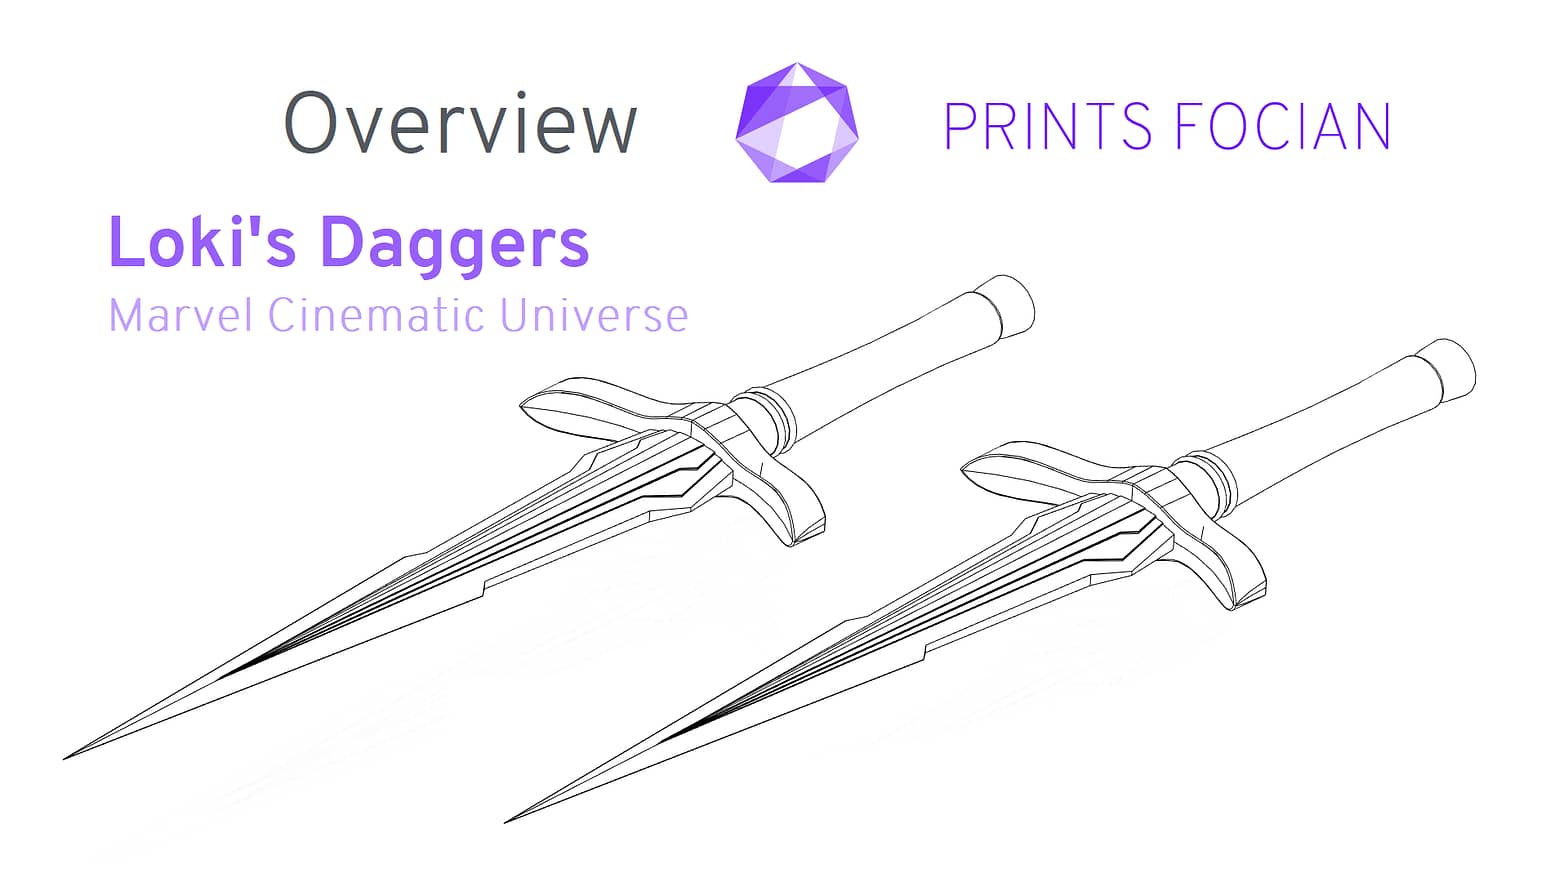 Wireframe image of the Loki's Daggers on a white background. Prints Focian Icon top and central. Text: Purple Prints Focian, Loki's Daggers, Marvel Cinimatic Universe MCU and dark grey Overview